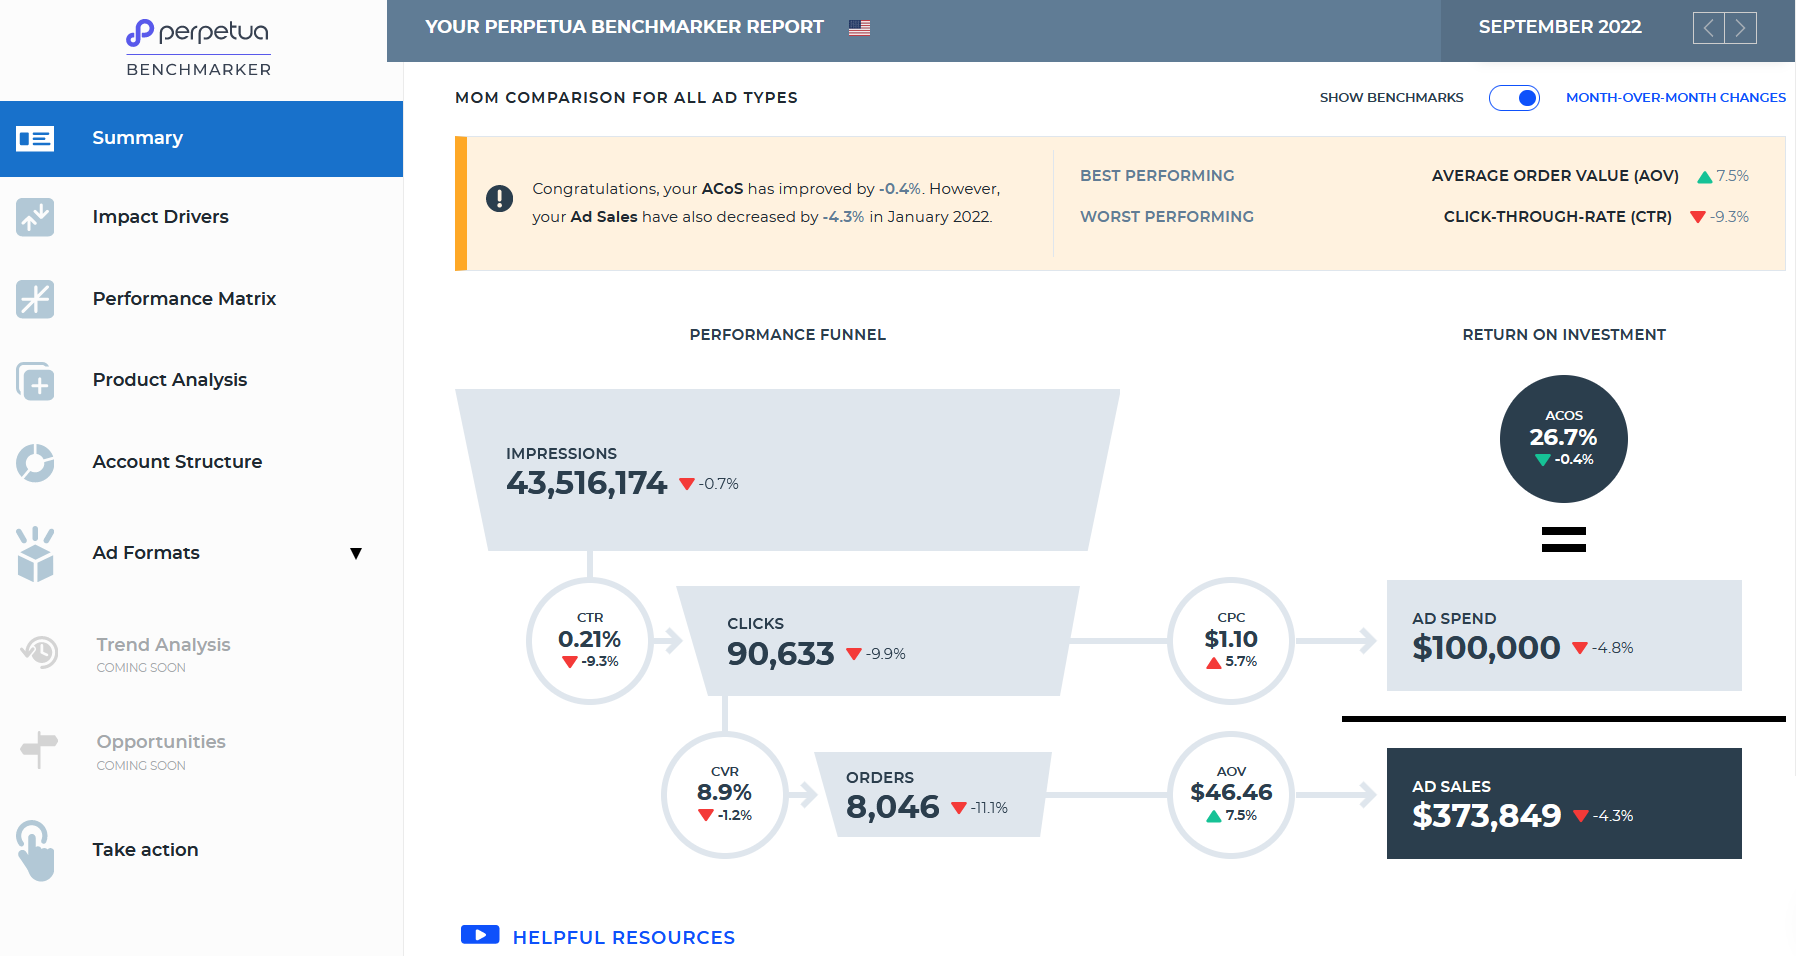 The Perpetua Benchmarker opens with a summary of your performance funnel, including month-over-month changes for all important KPIs.